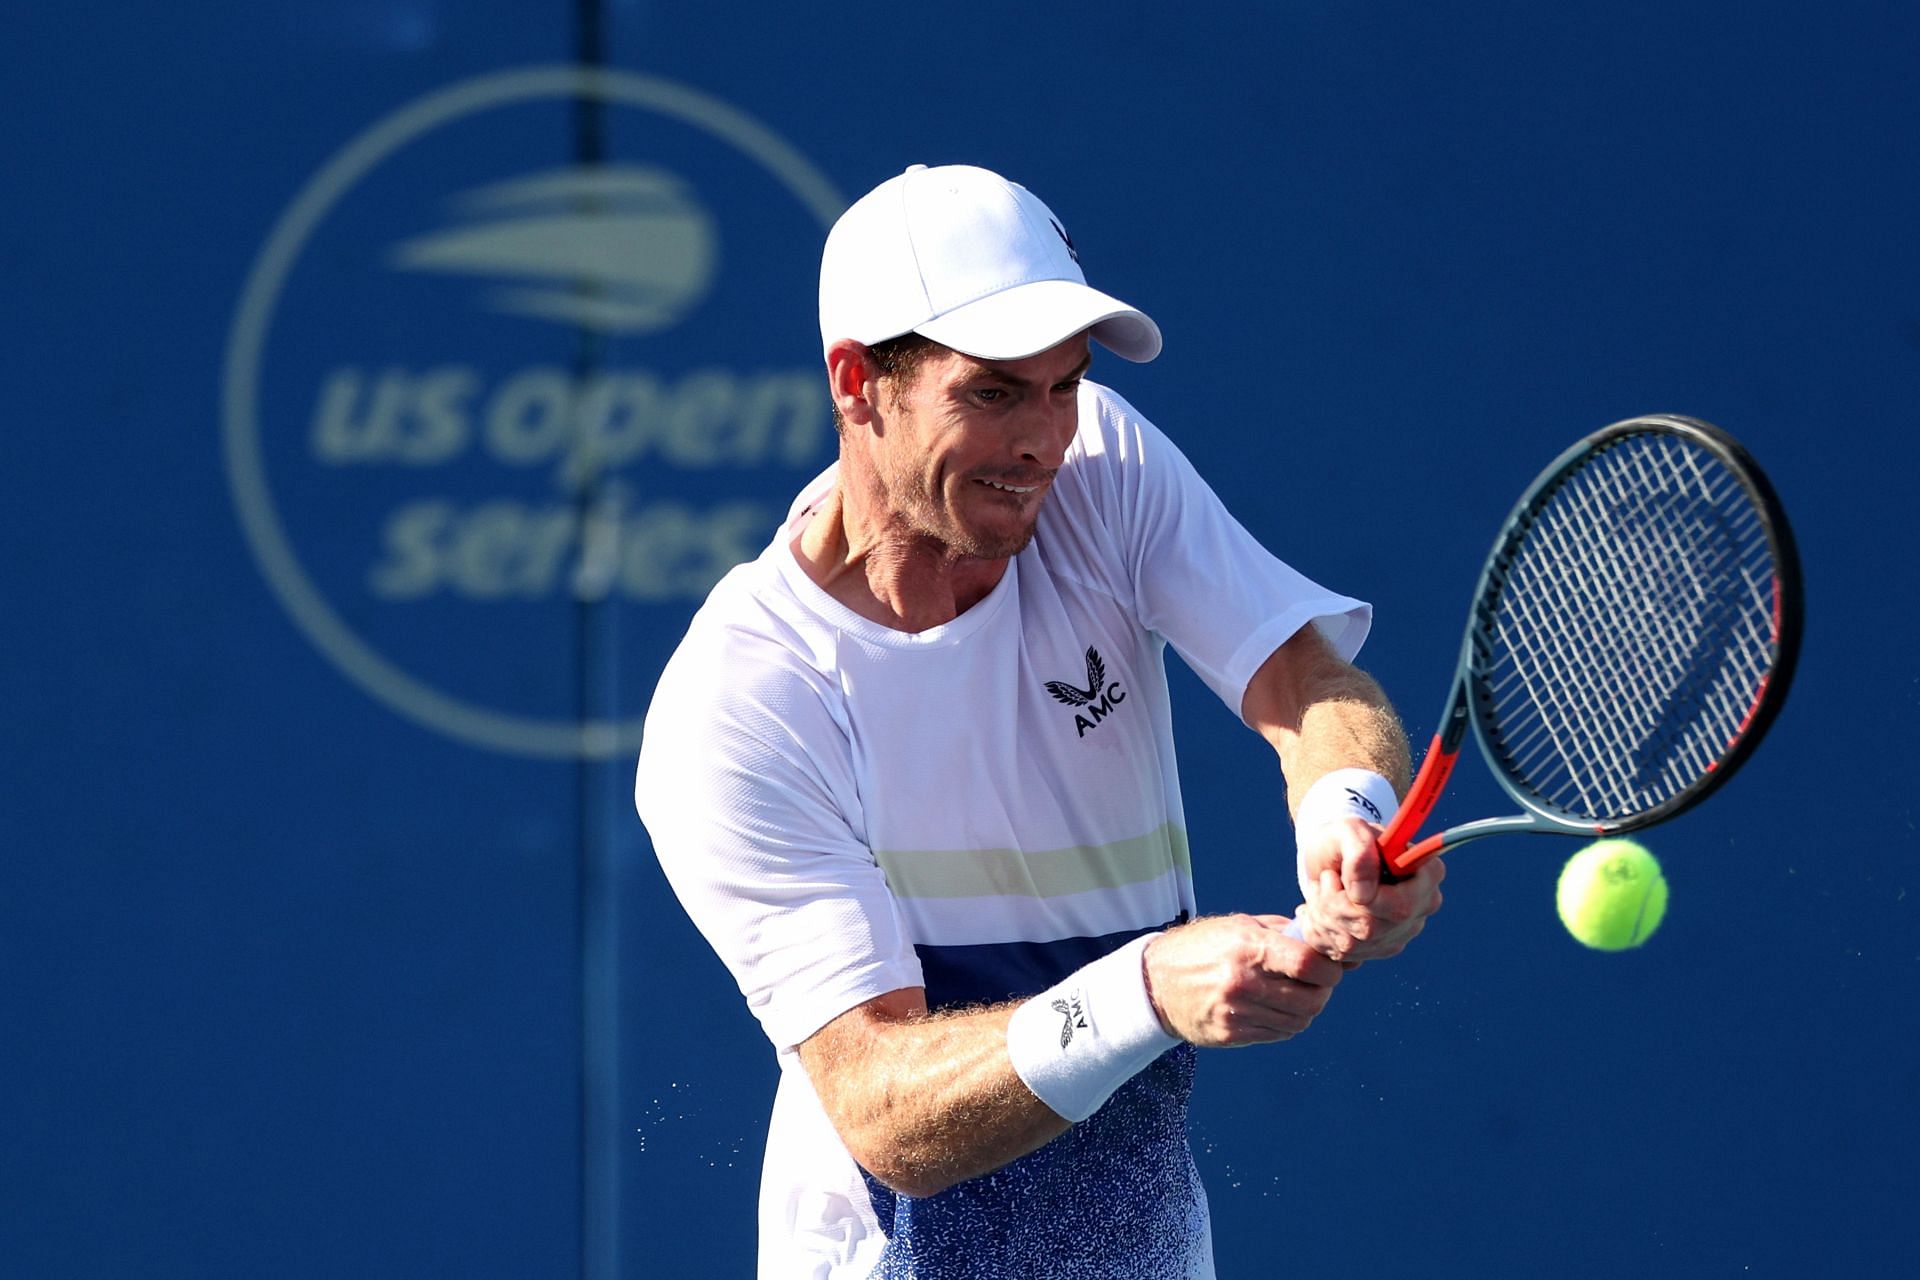 Andy Murray at the Citi Open - Day 3